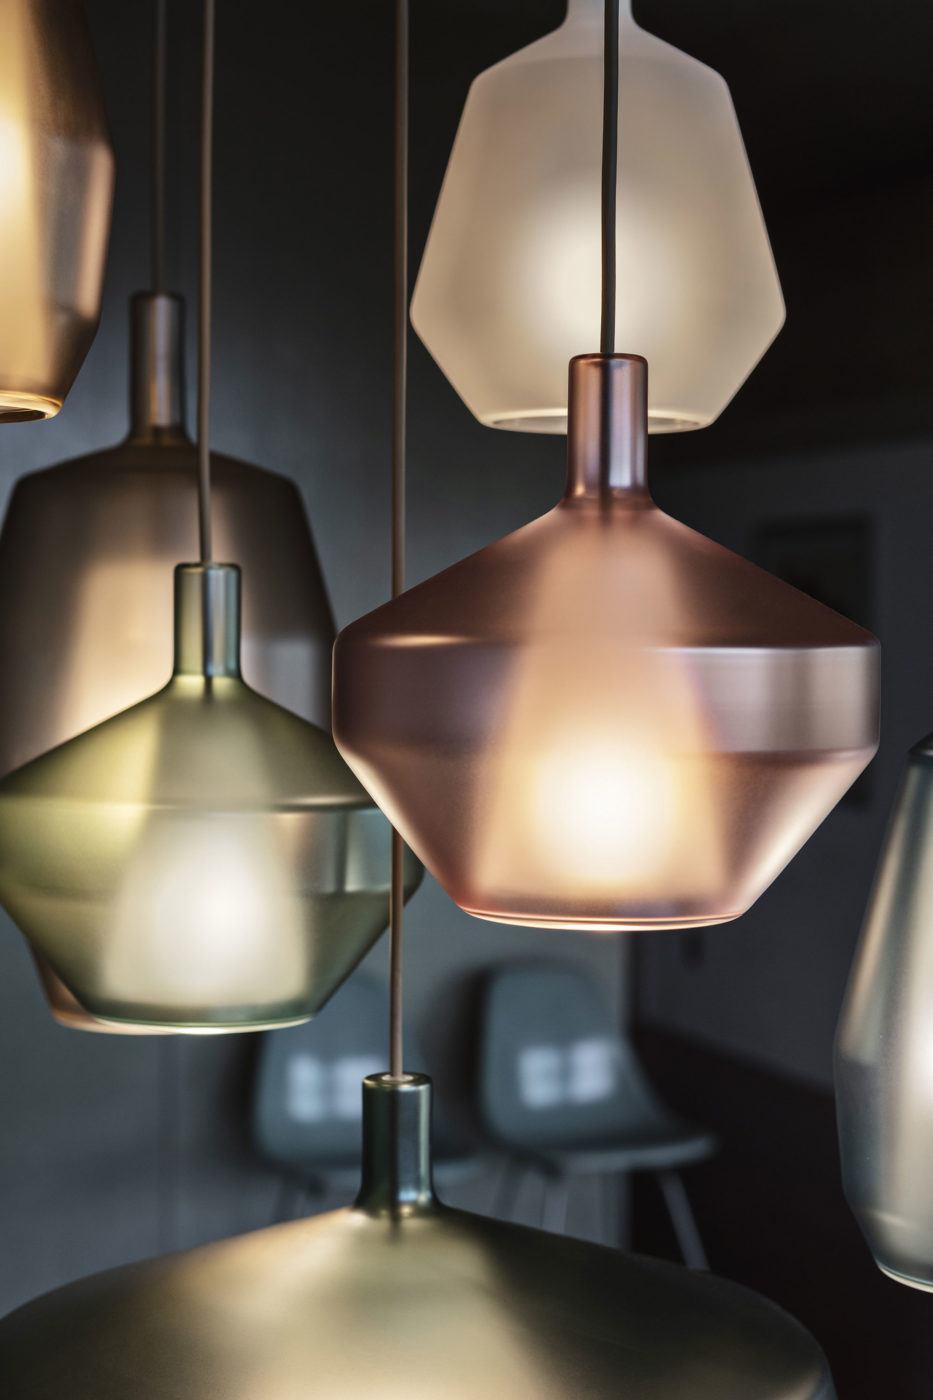 Collection of hanging glass pendant lights